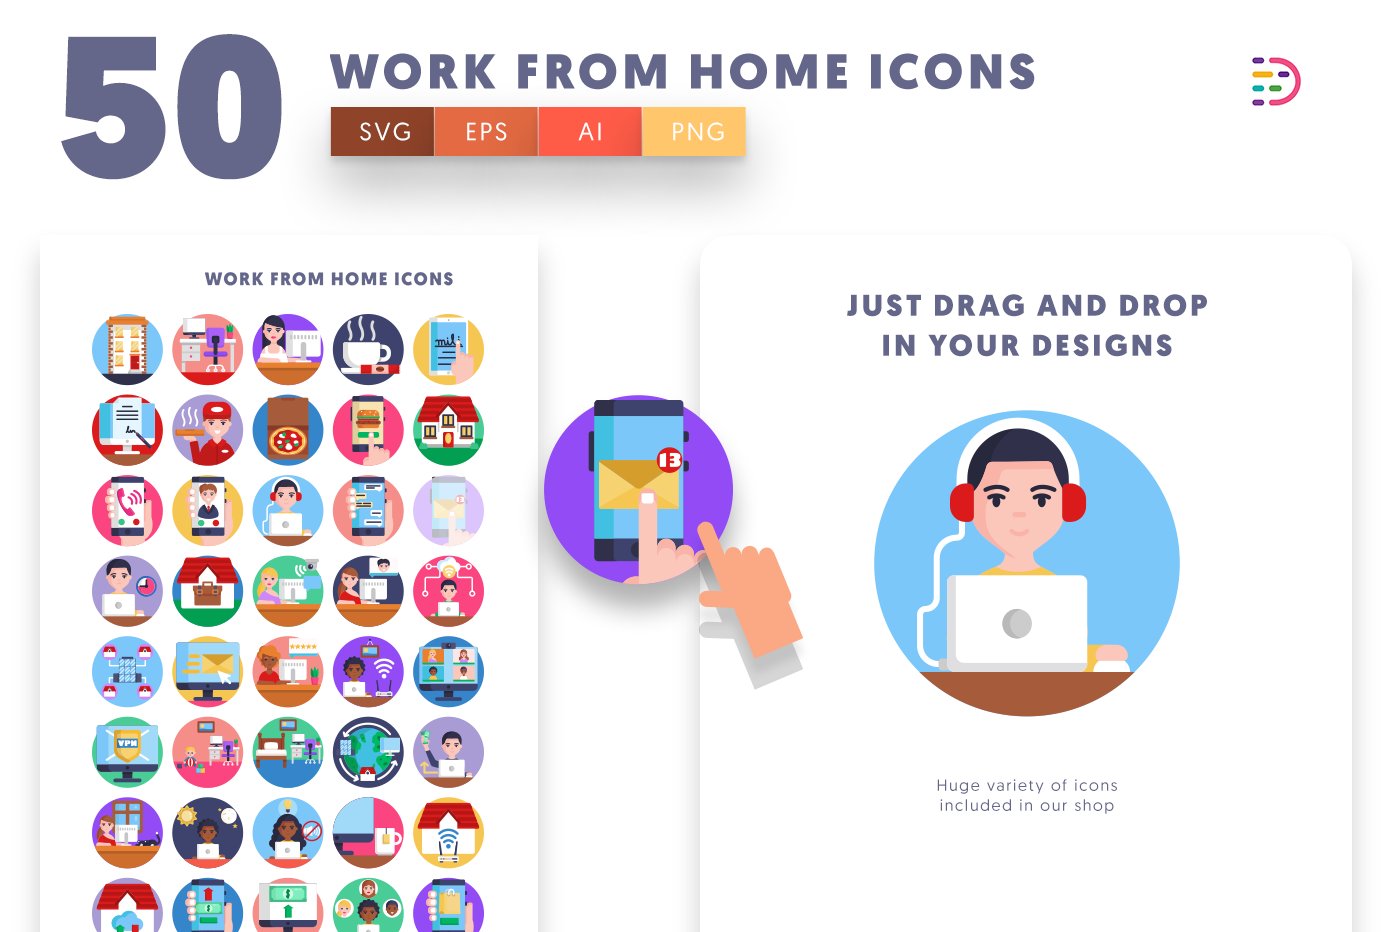 workfromhome icons cover 1 767